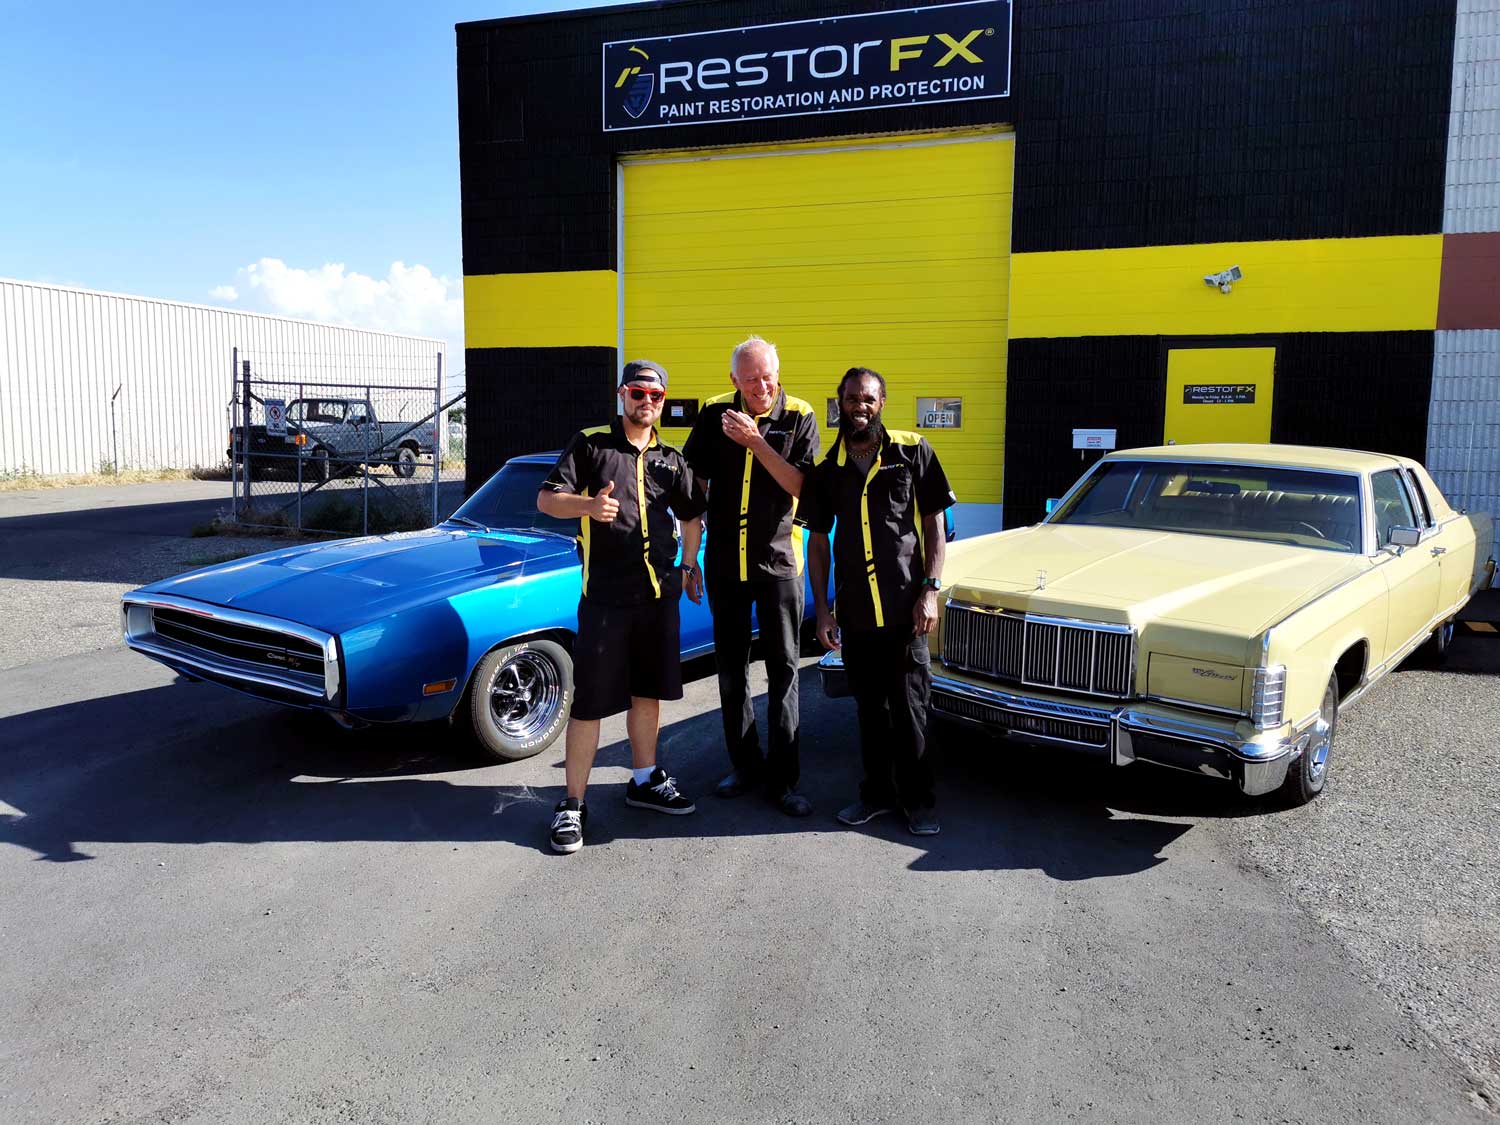 RestorFX Lethbridge team in front of the Center with blue and off-white classic cars in midday sun